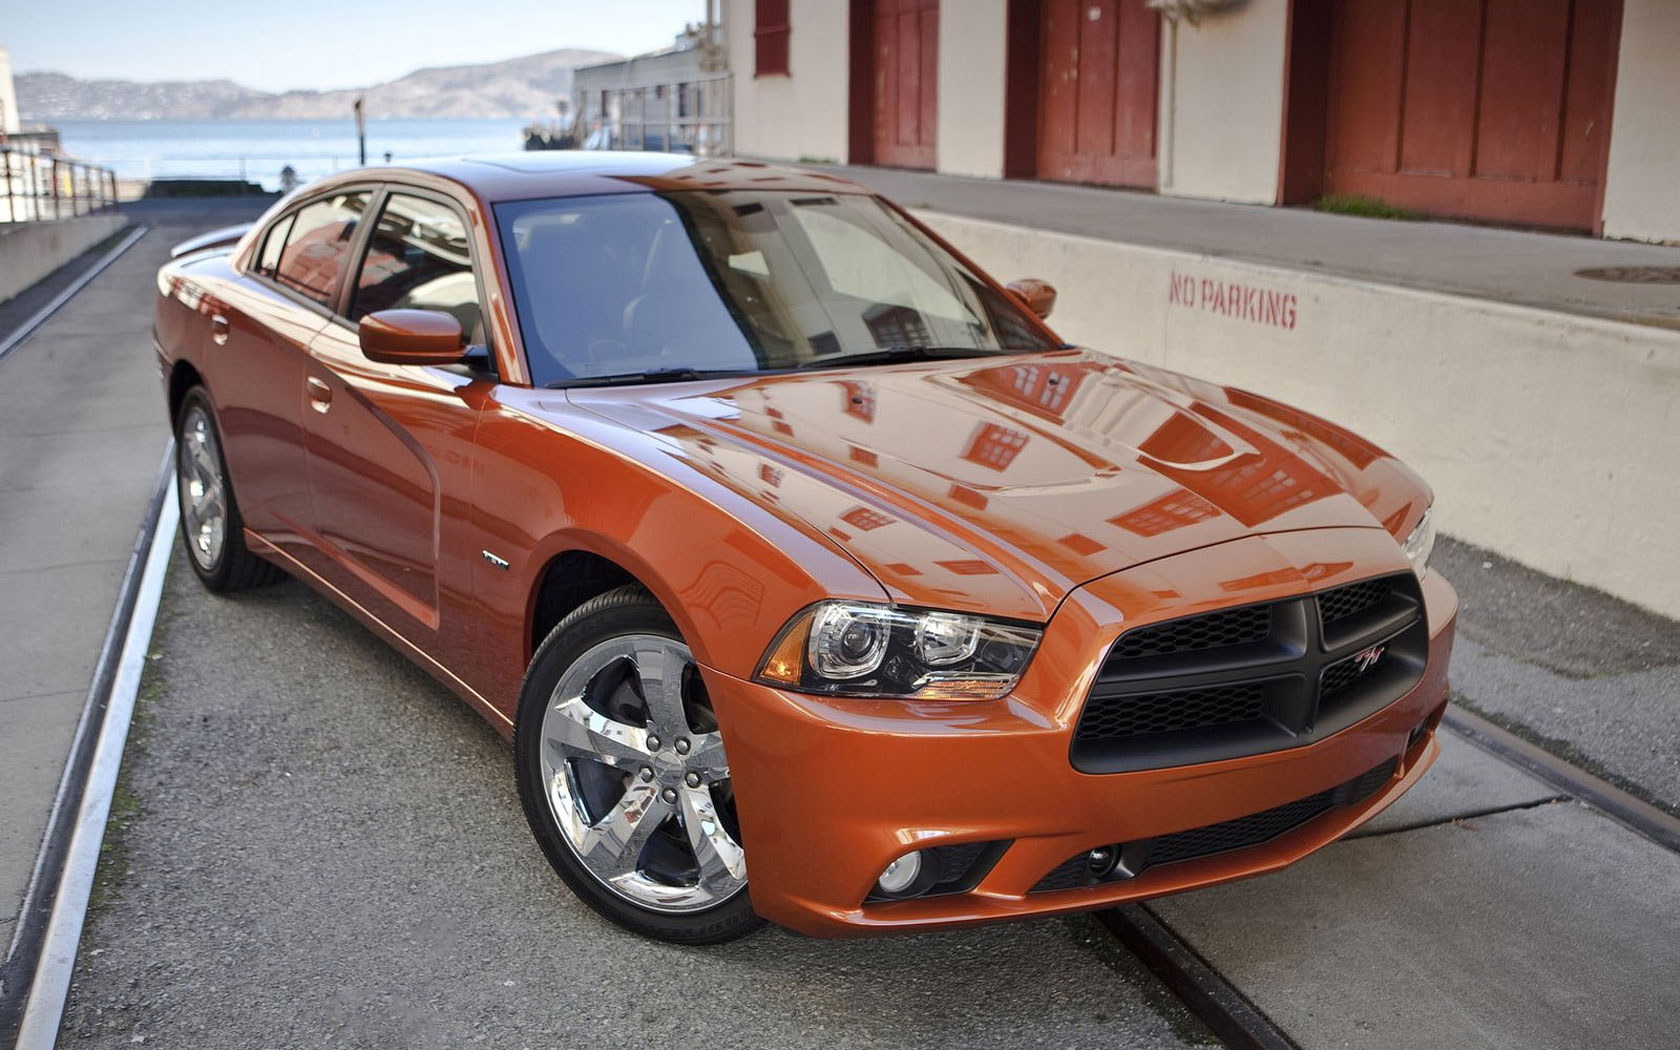 Dodge charger 2011